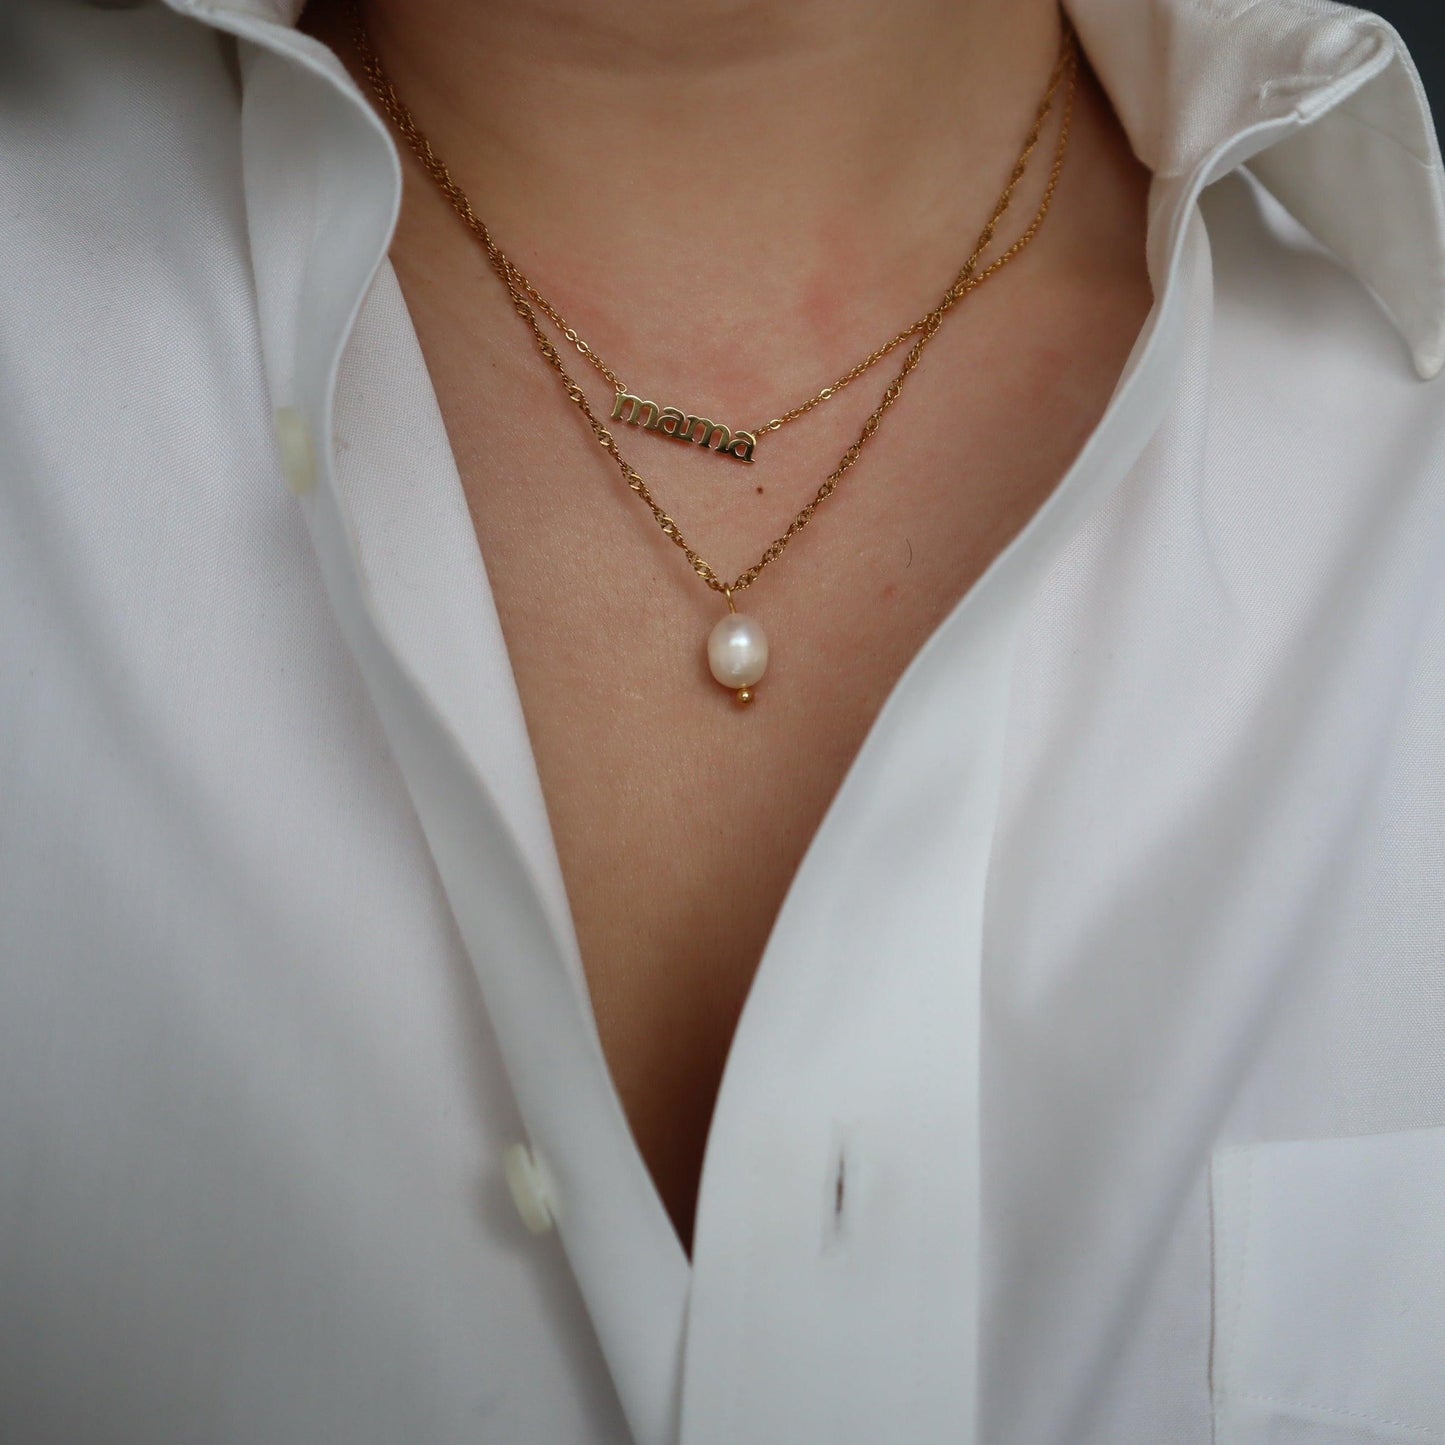 mama Necklace - JESSA JEWELRY | GOLD JEWELRY; dainty, affordable gold everyday jewelry. Tarnish free, water-resistant, hypoallergenic. Jewelry for everyday wear